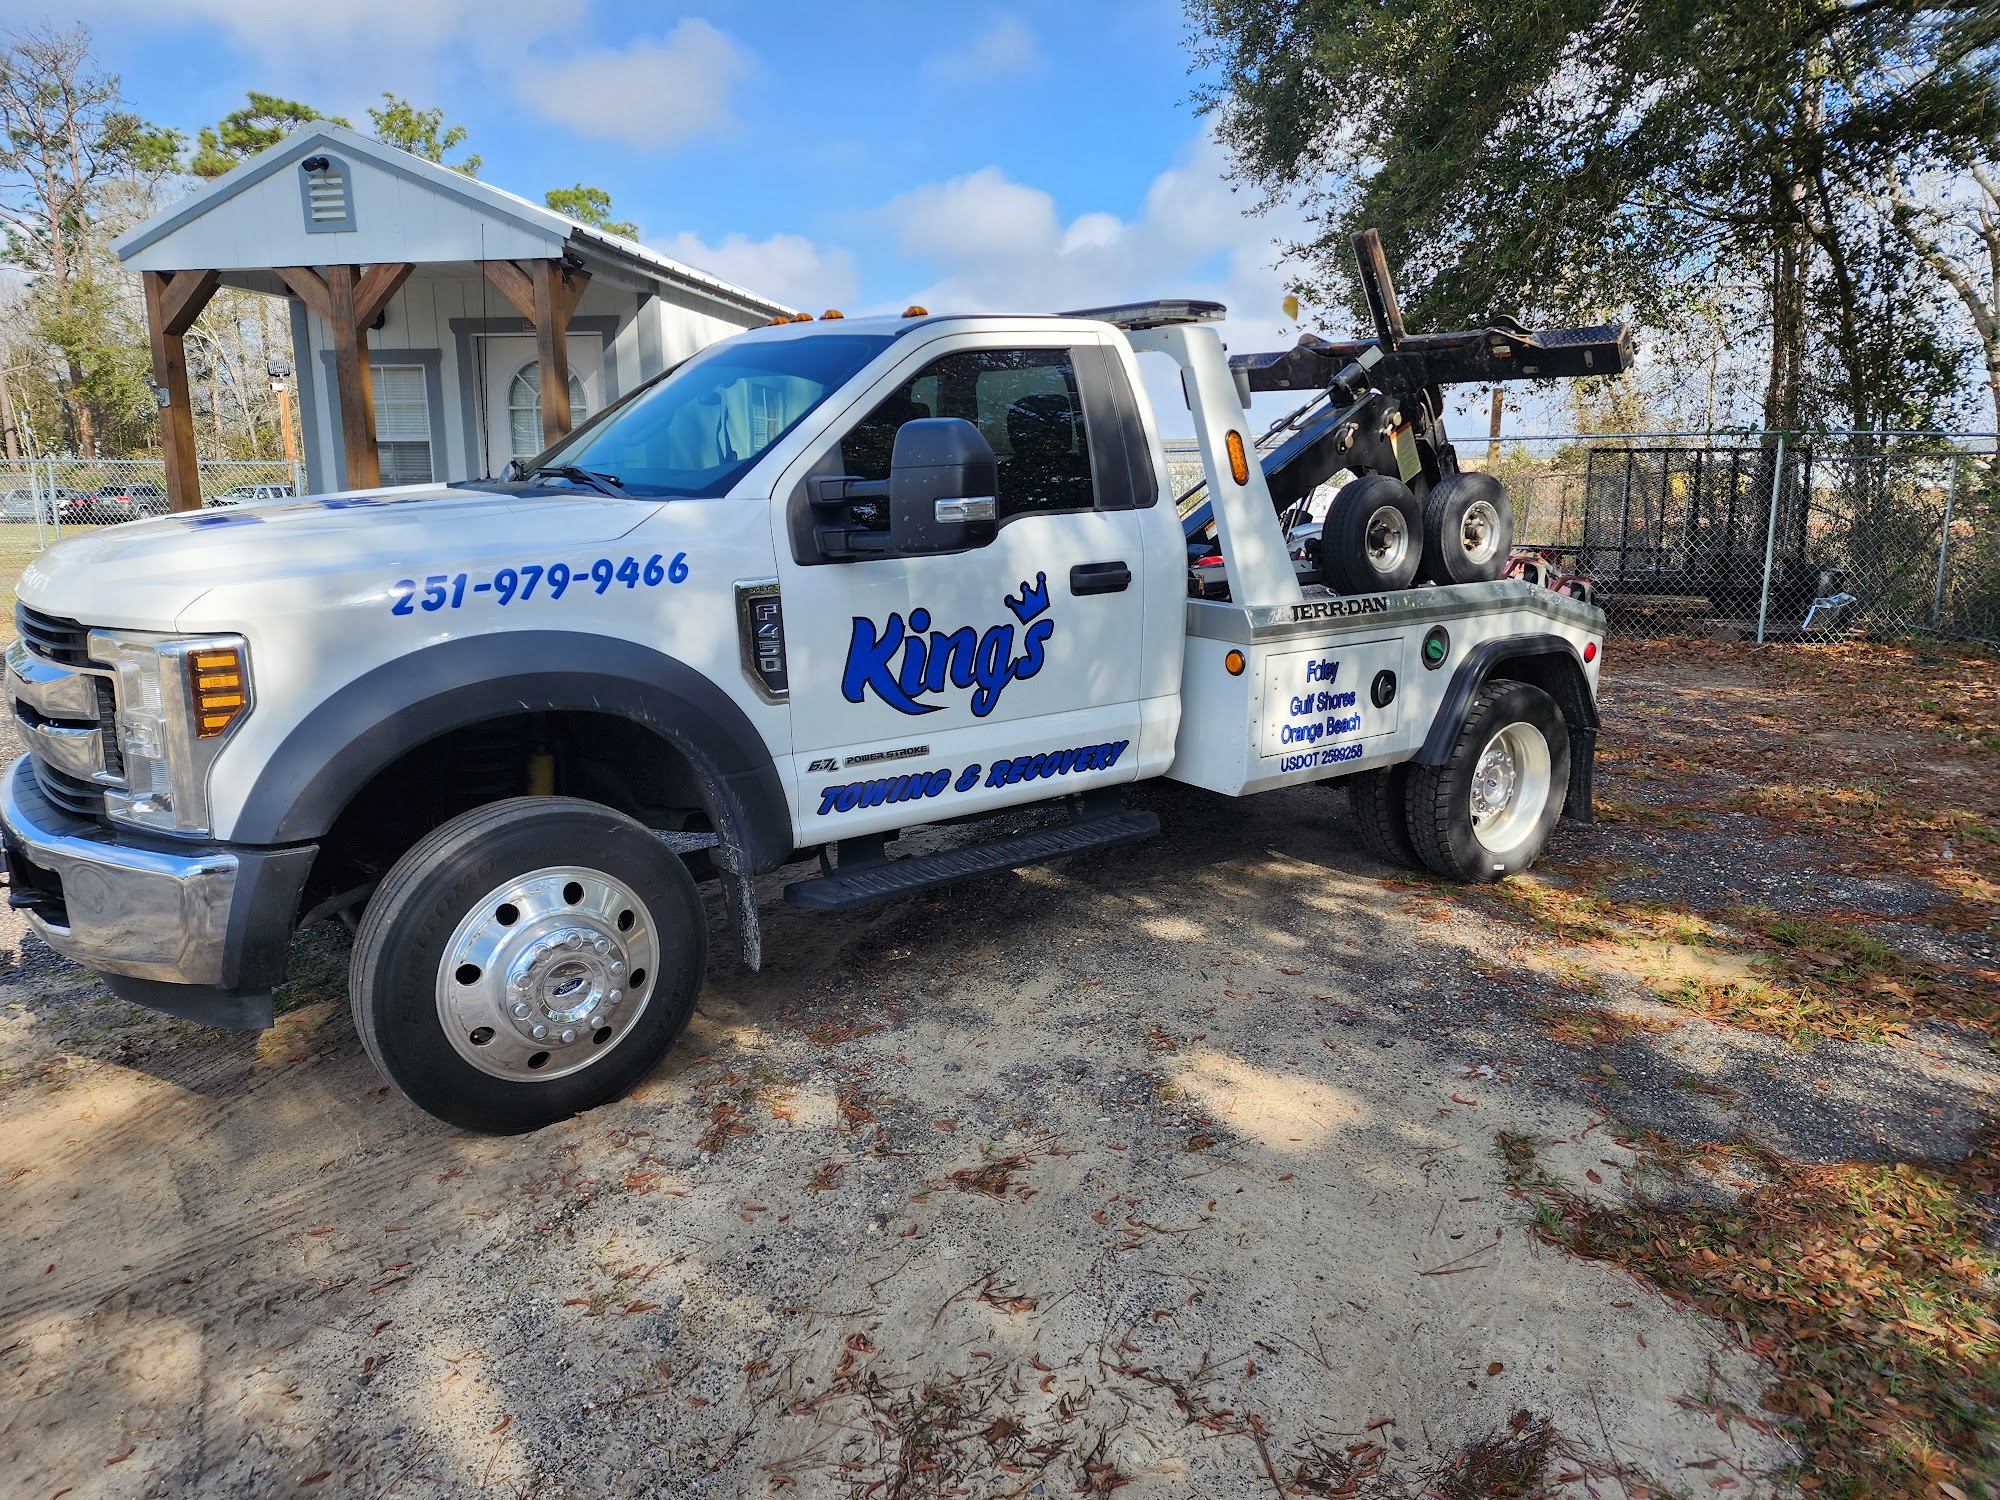 Kings Towing and Recovery